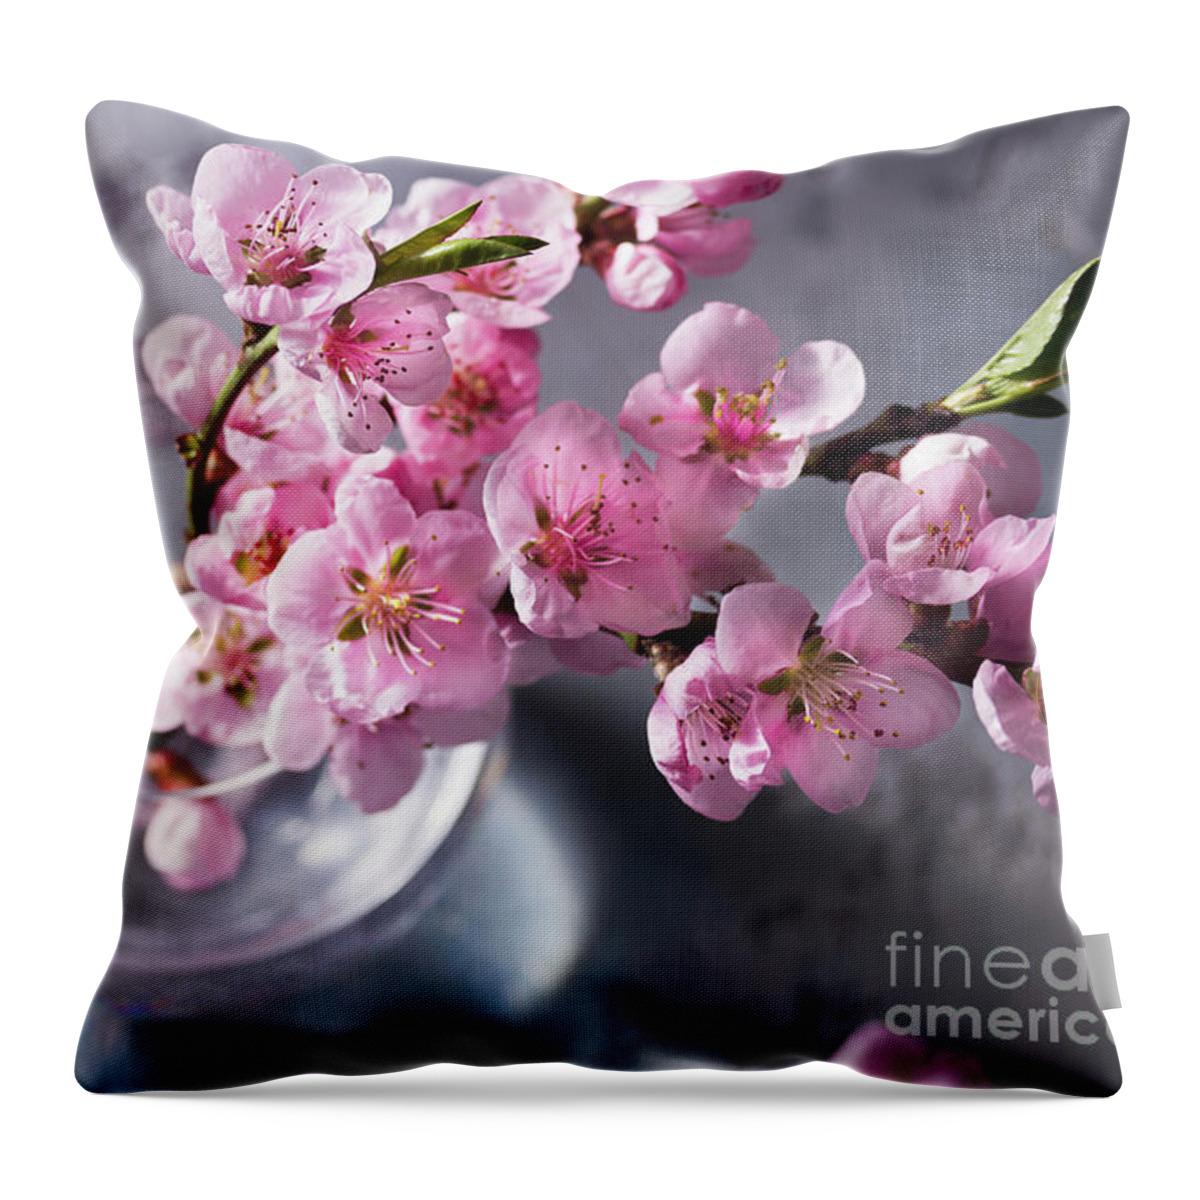 Cherry Throw Pillow featuring the photograph Pink Cherry Blossom by Anastasy Yarmolovich